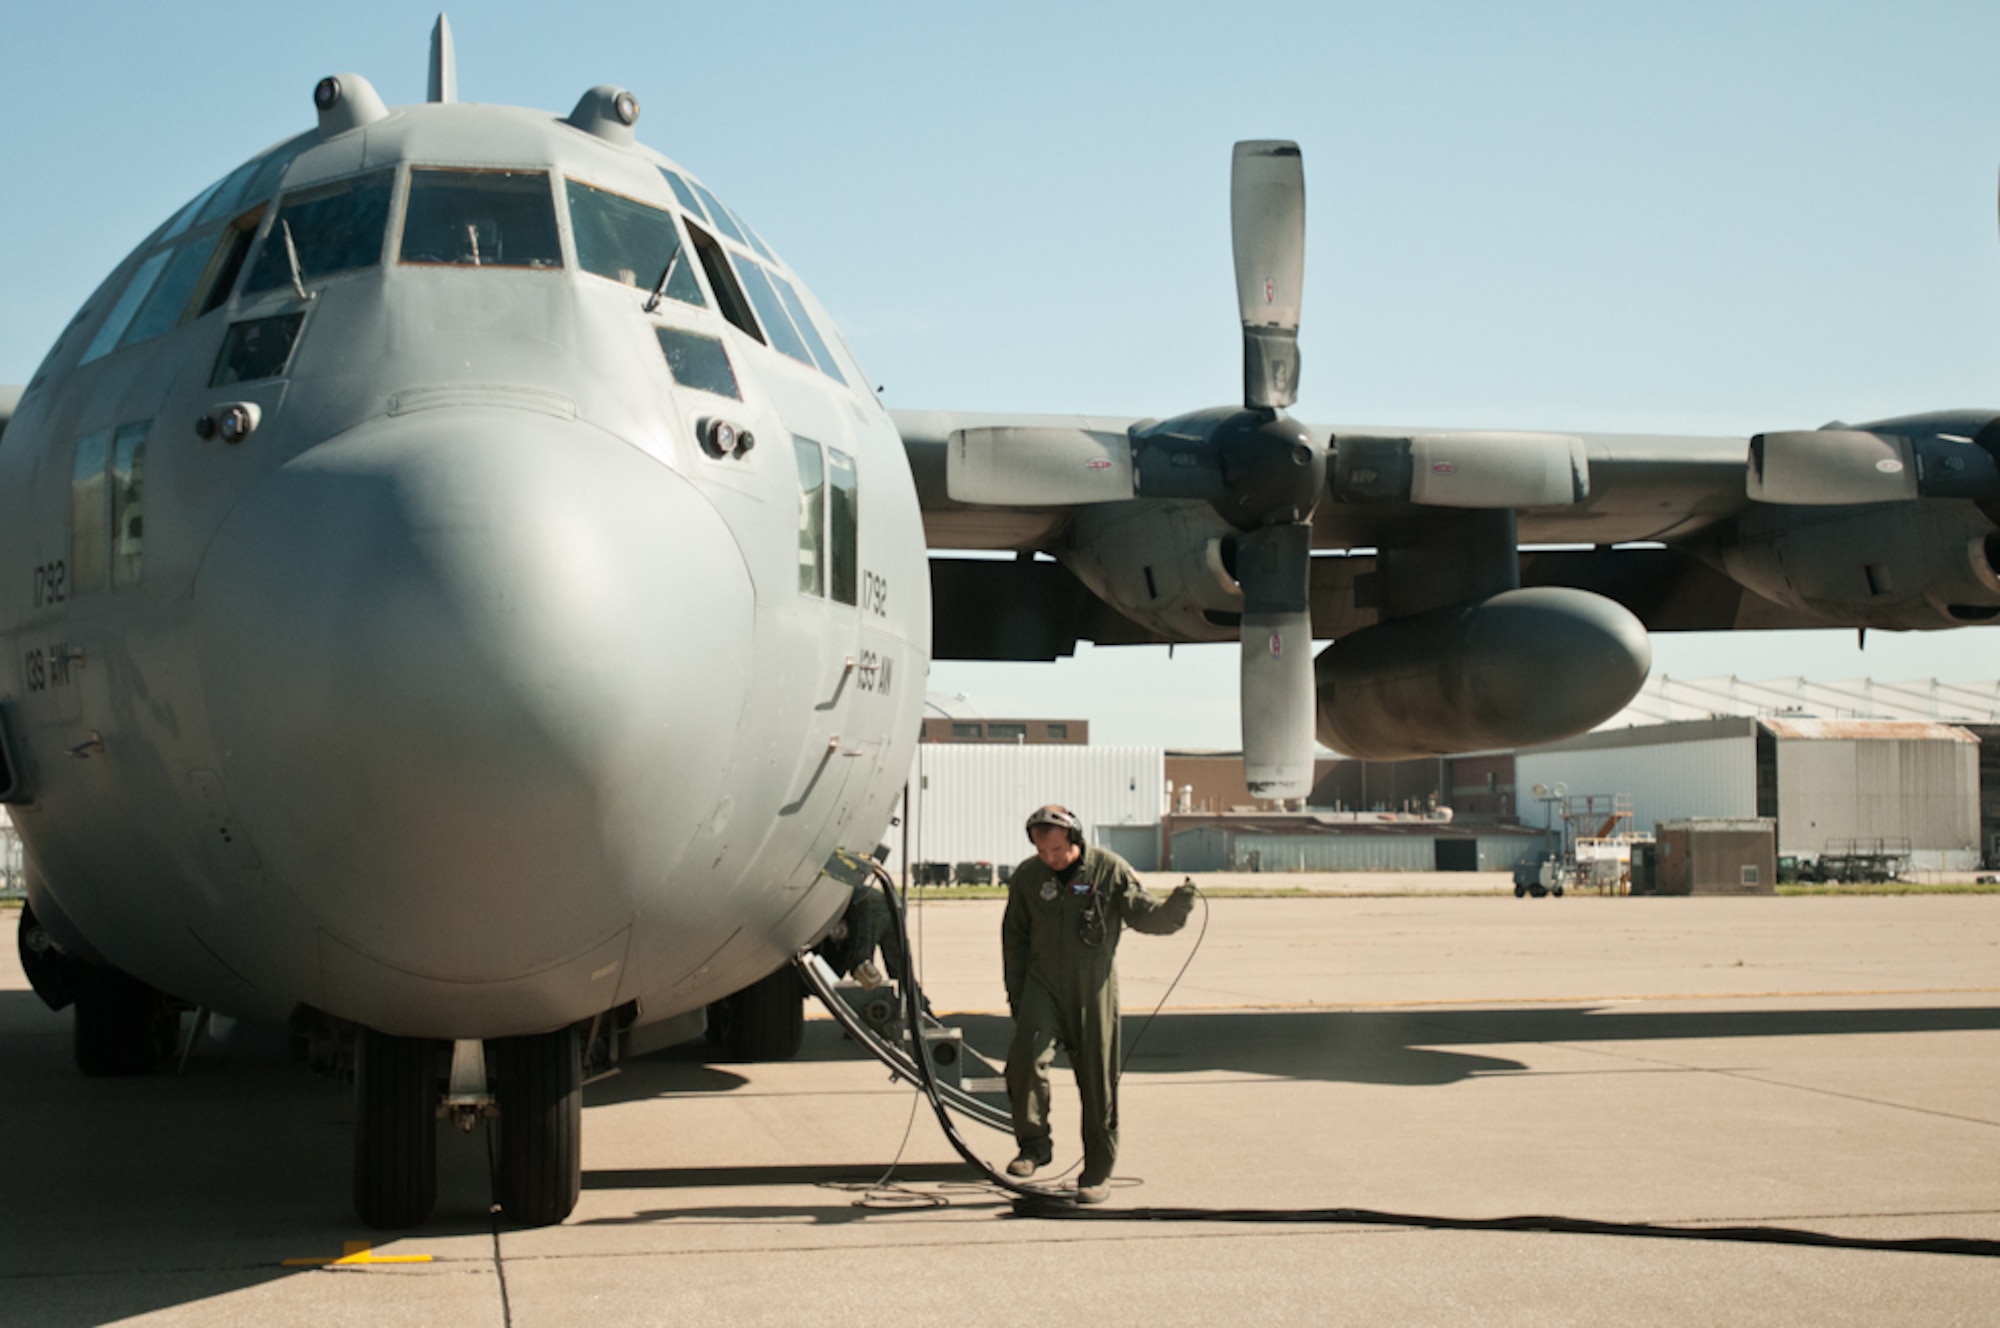 A flight crew member of the 139th Airlift Wing, Missouri Air National Guard, readies a C-130 for flight at the Kansas City International Airport in Kansas City, Mo., July 26, 2011. (U.S. Air Force photo by Senior Airman Katie Kidd)